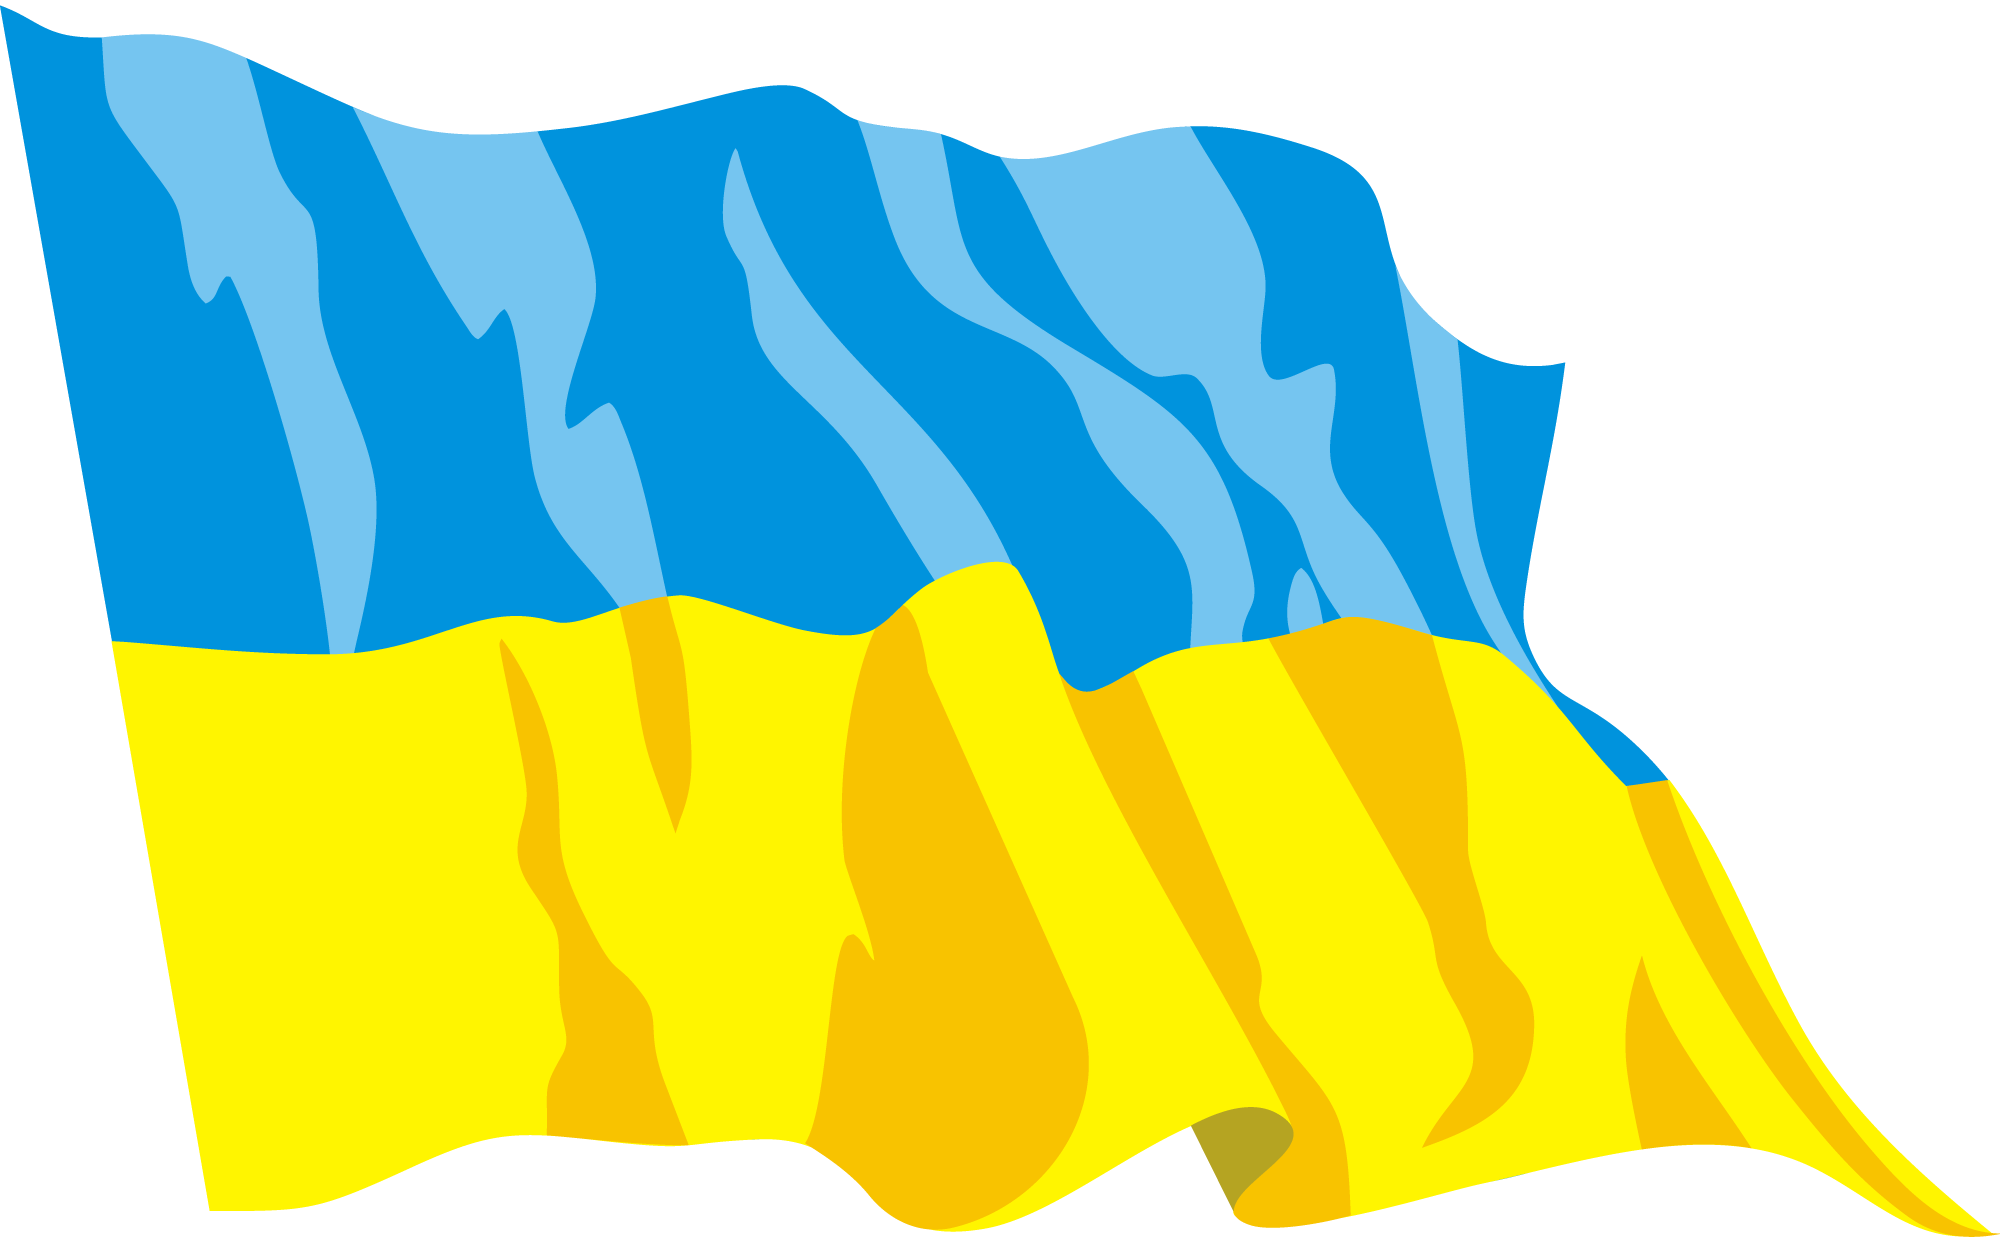 Ukrainian Flag Nail Art: Show Your Support - wide 7